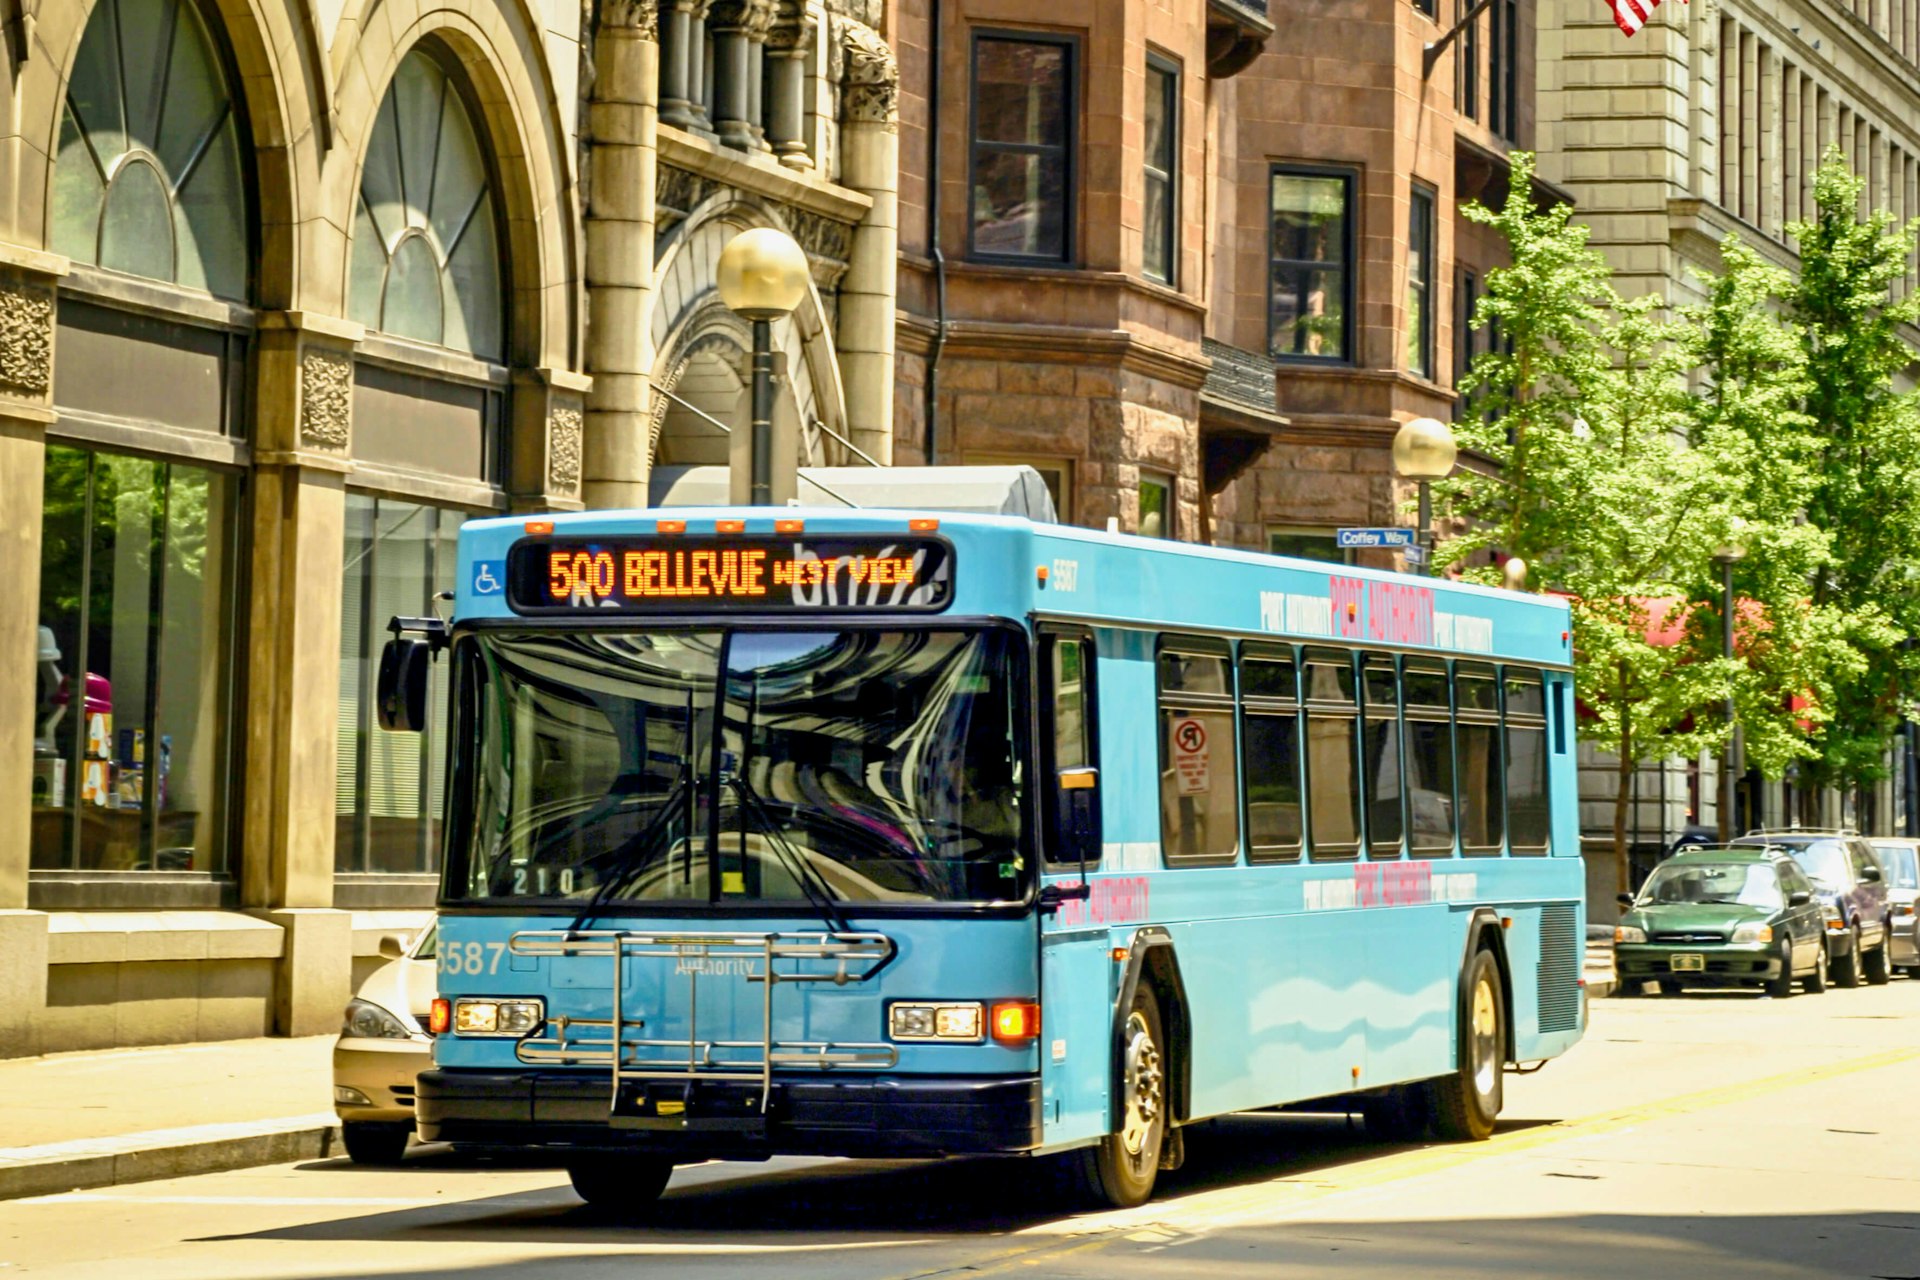 A blue public transport bus in downtown Pittsburgh, Pennsylvania USA